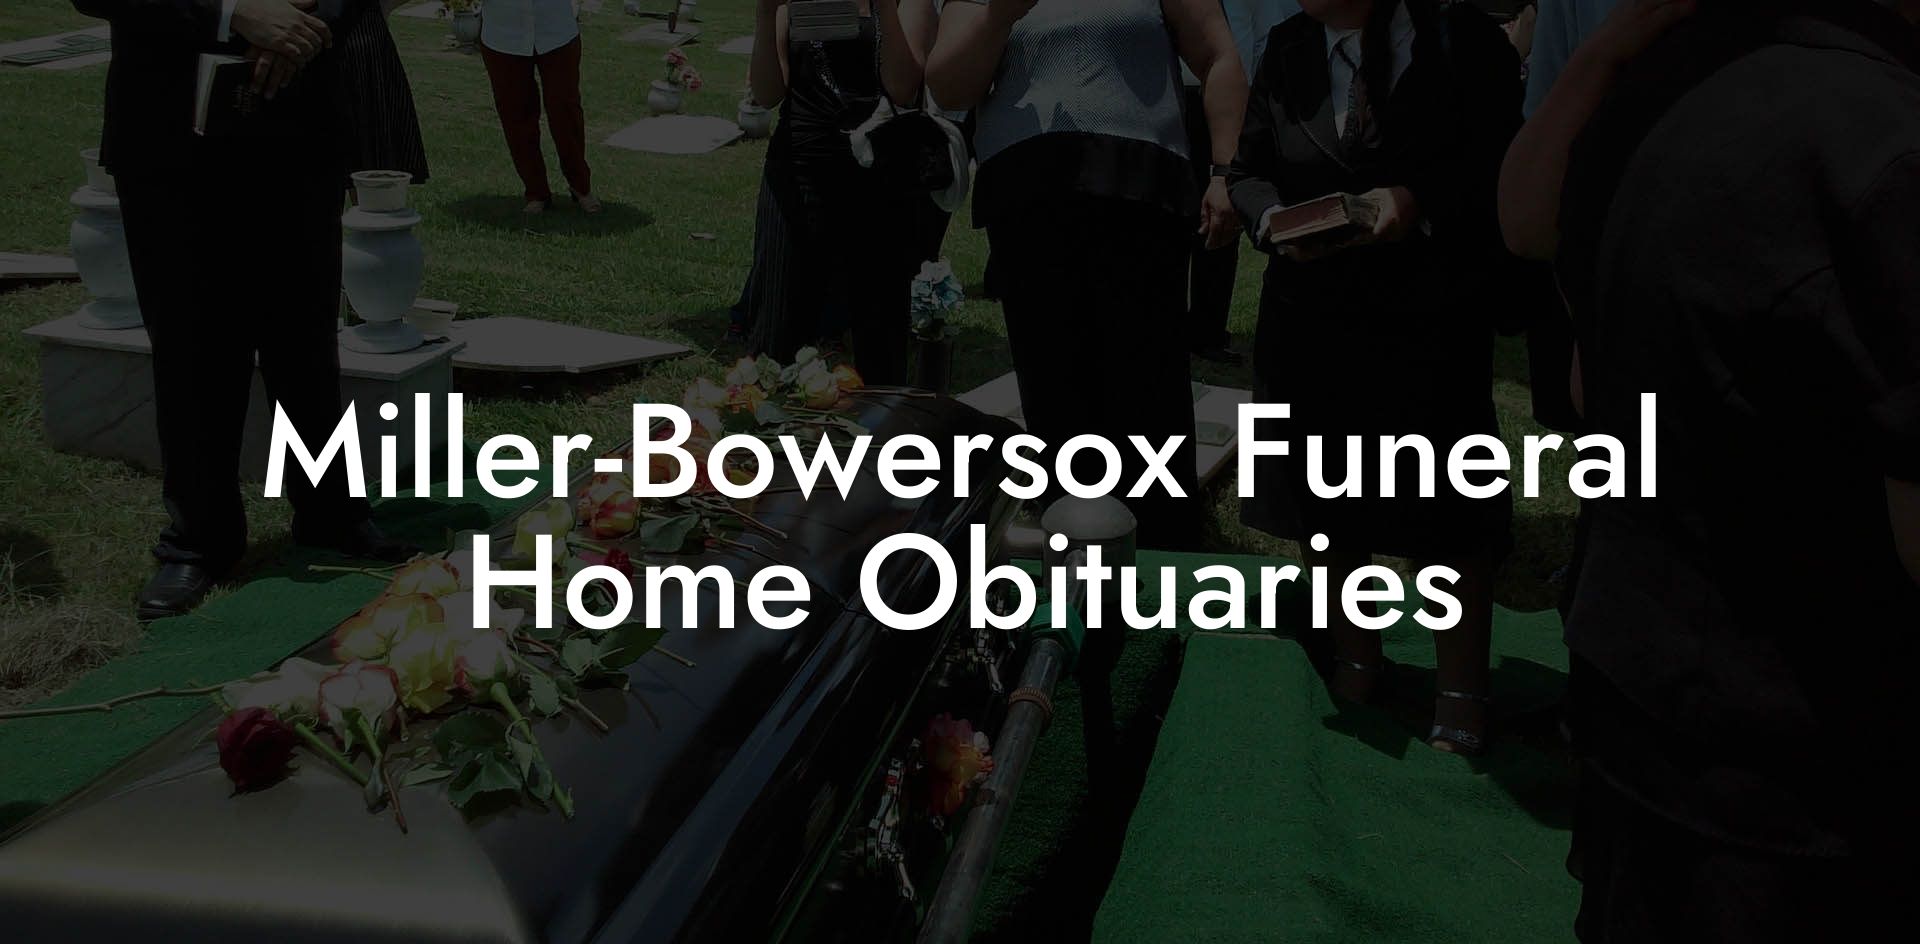 Miller-Bowersox Funeral Home Obituaries